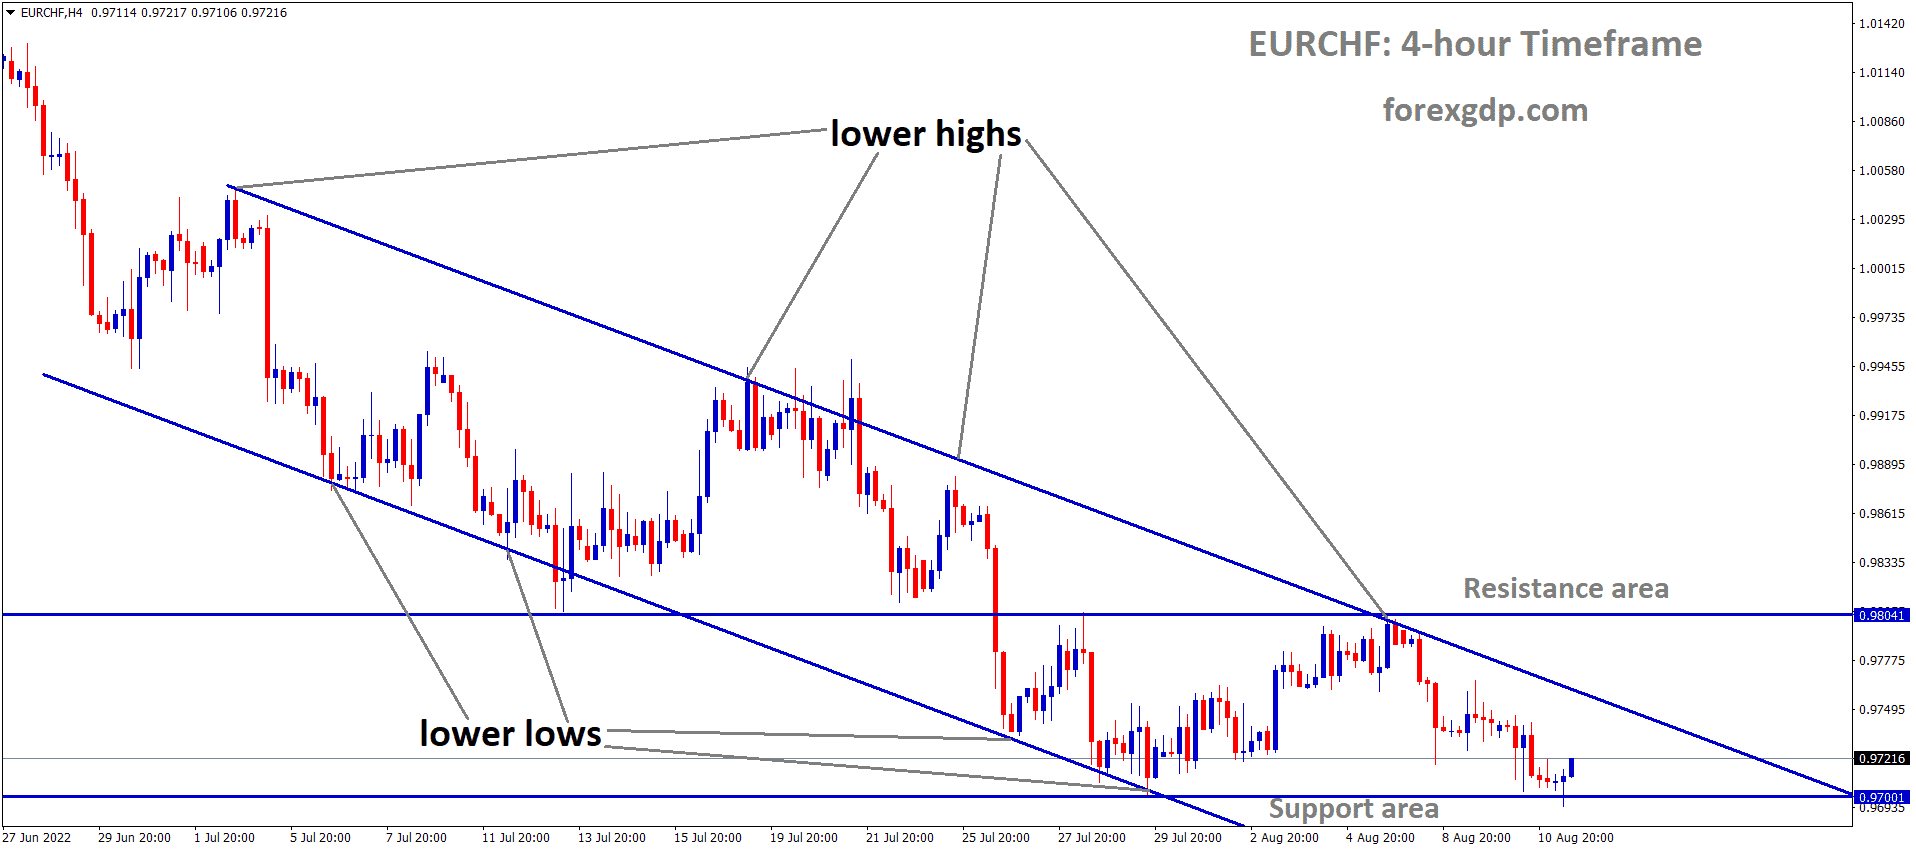 EURCHF is moving in the Descending channel and the market has rebounded from the Horizontal support area of the Pattern.